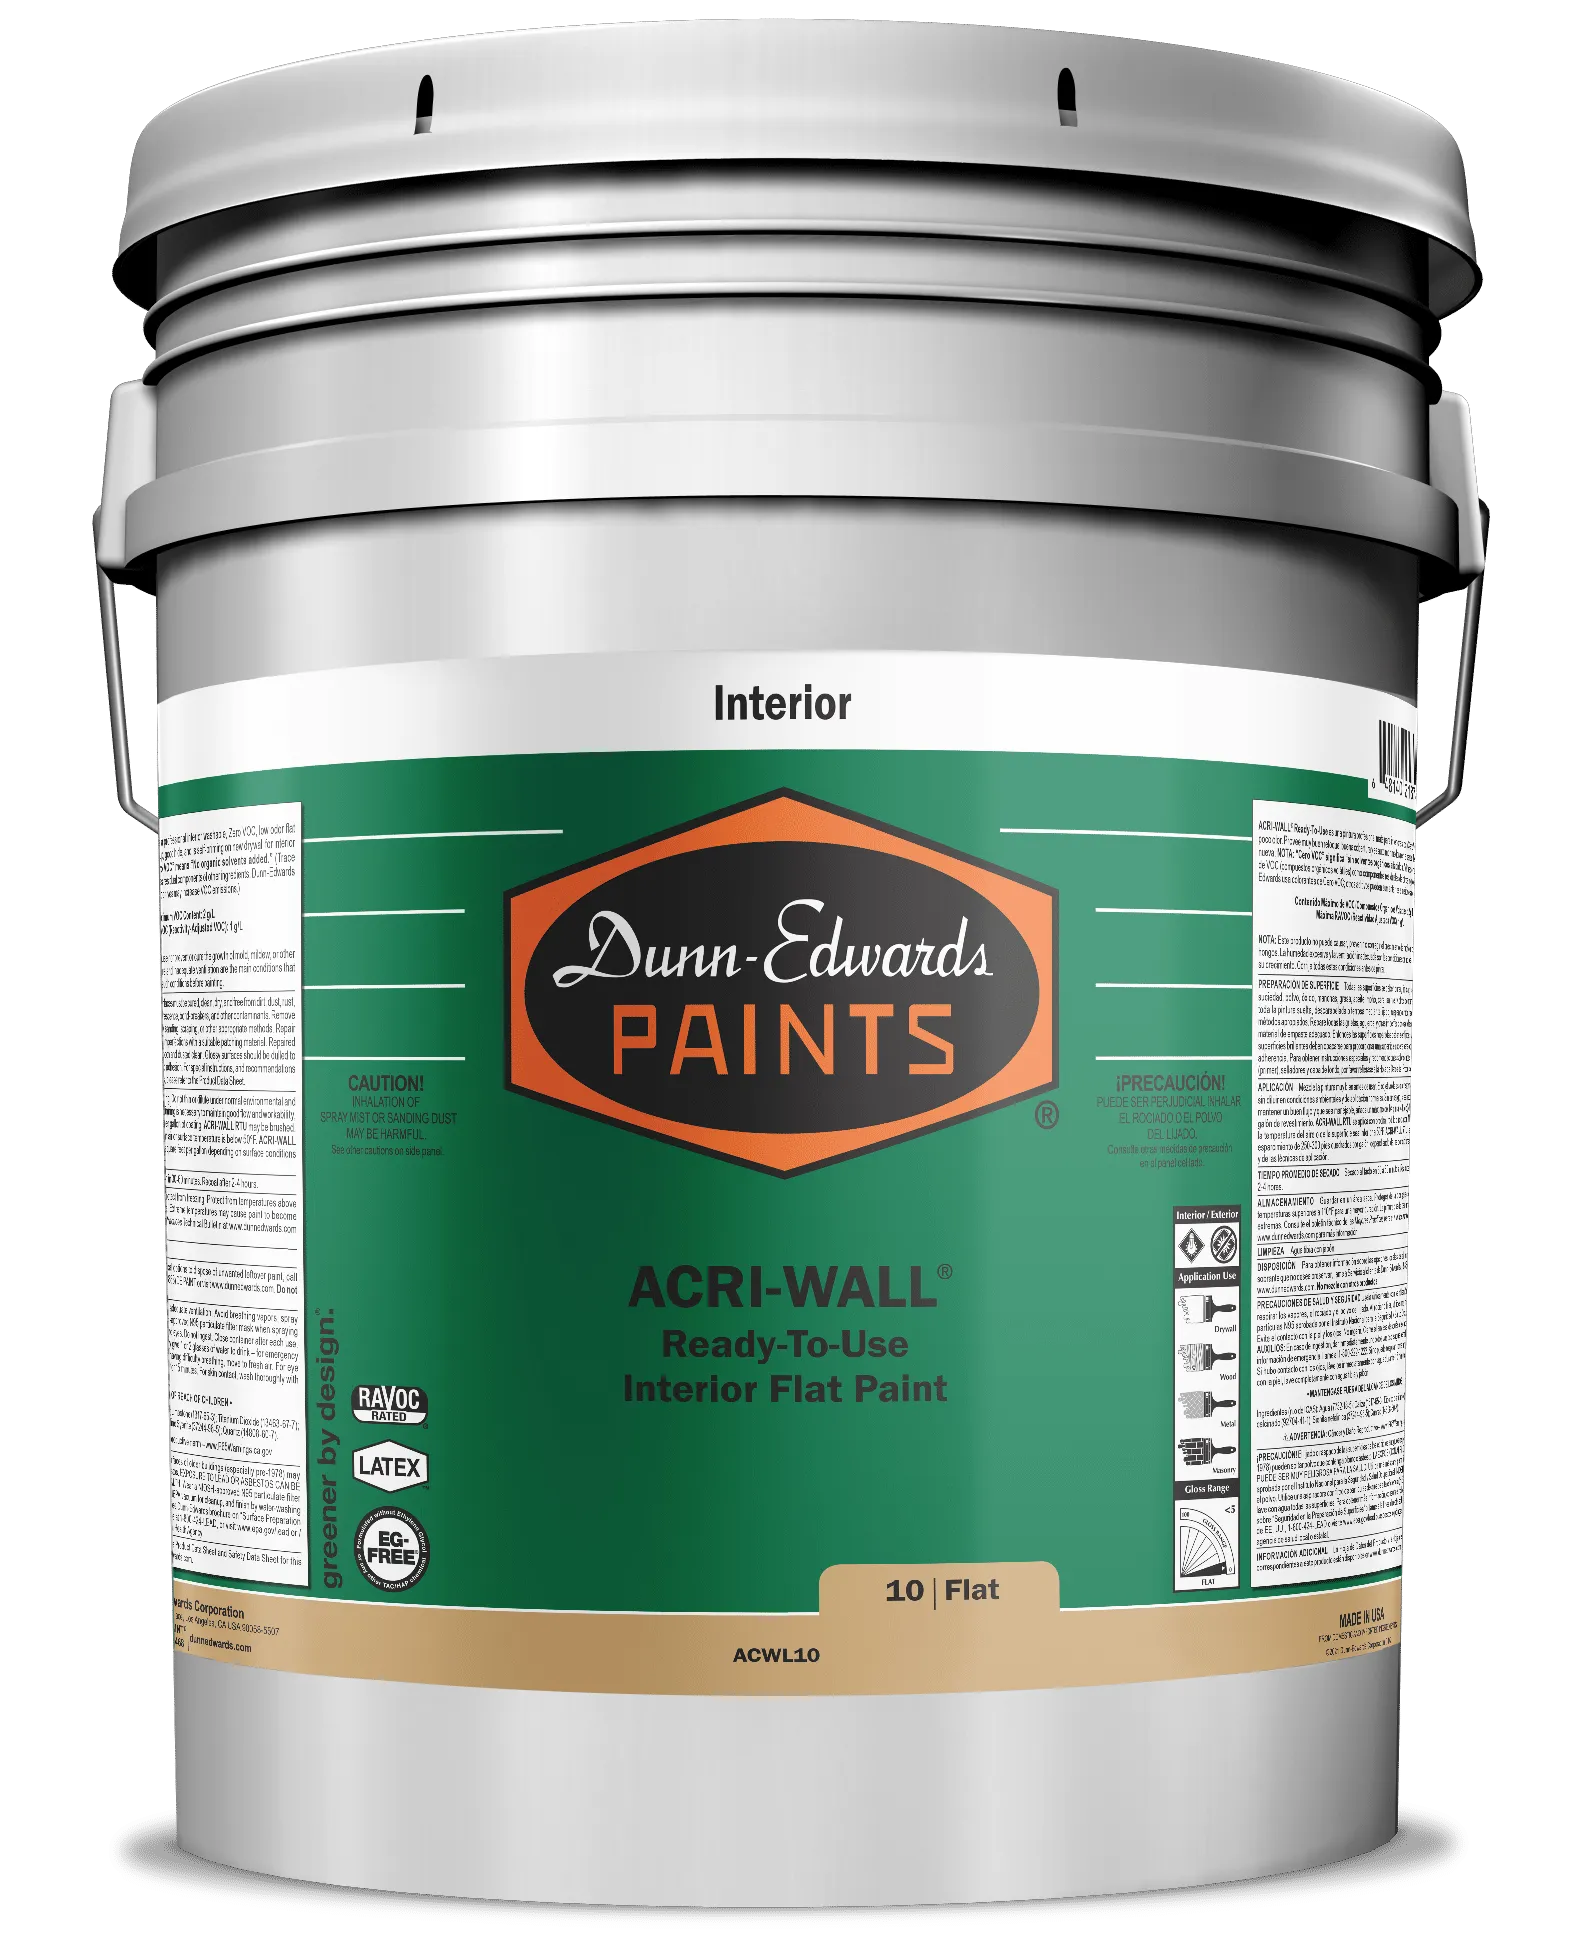 ACRI-WALL Ready-To-Use Interior Flat Paint Can